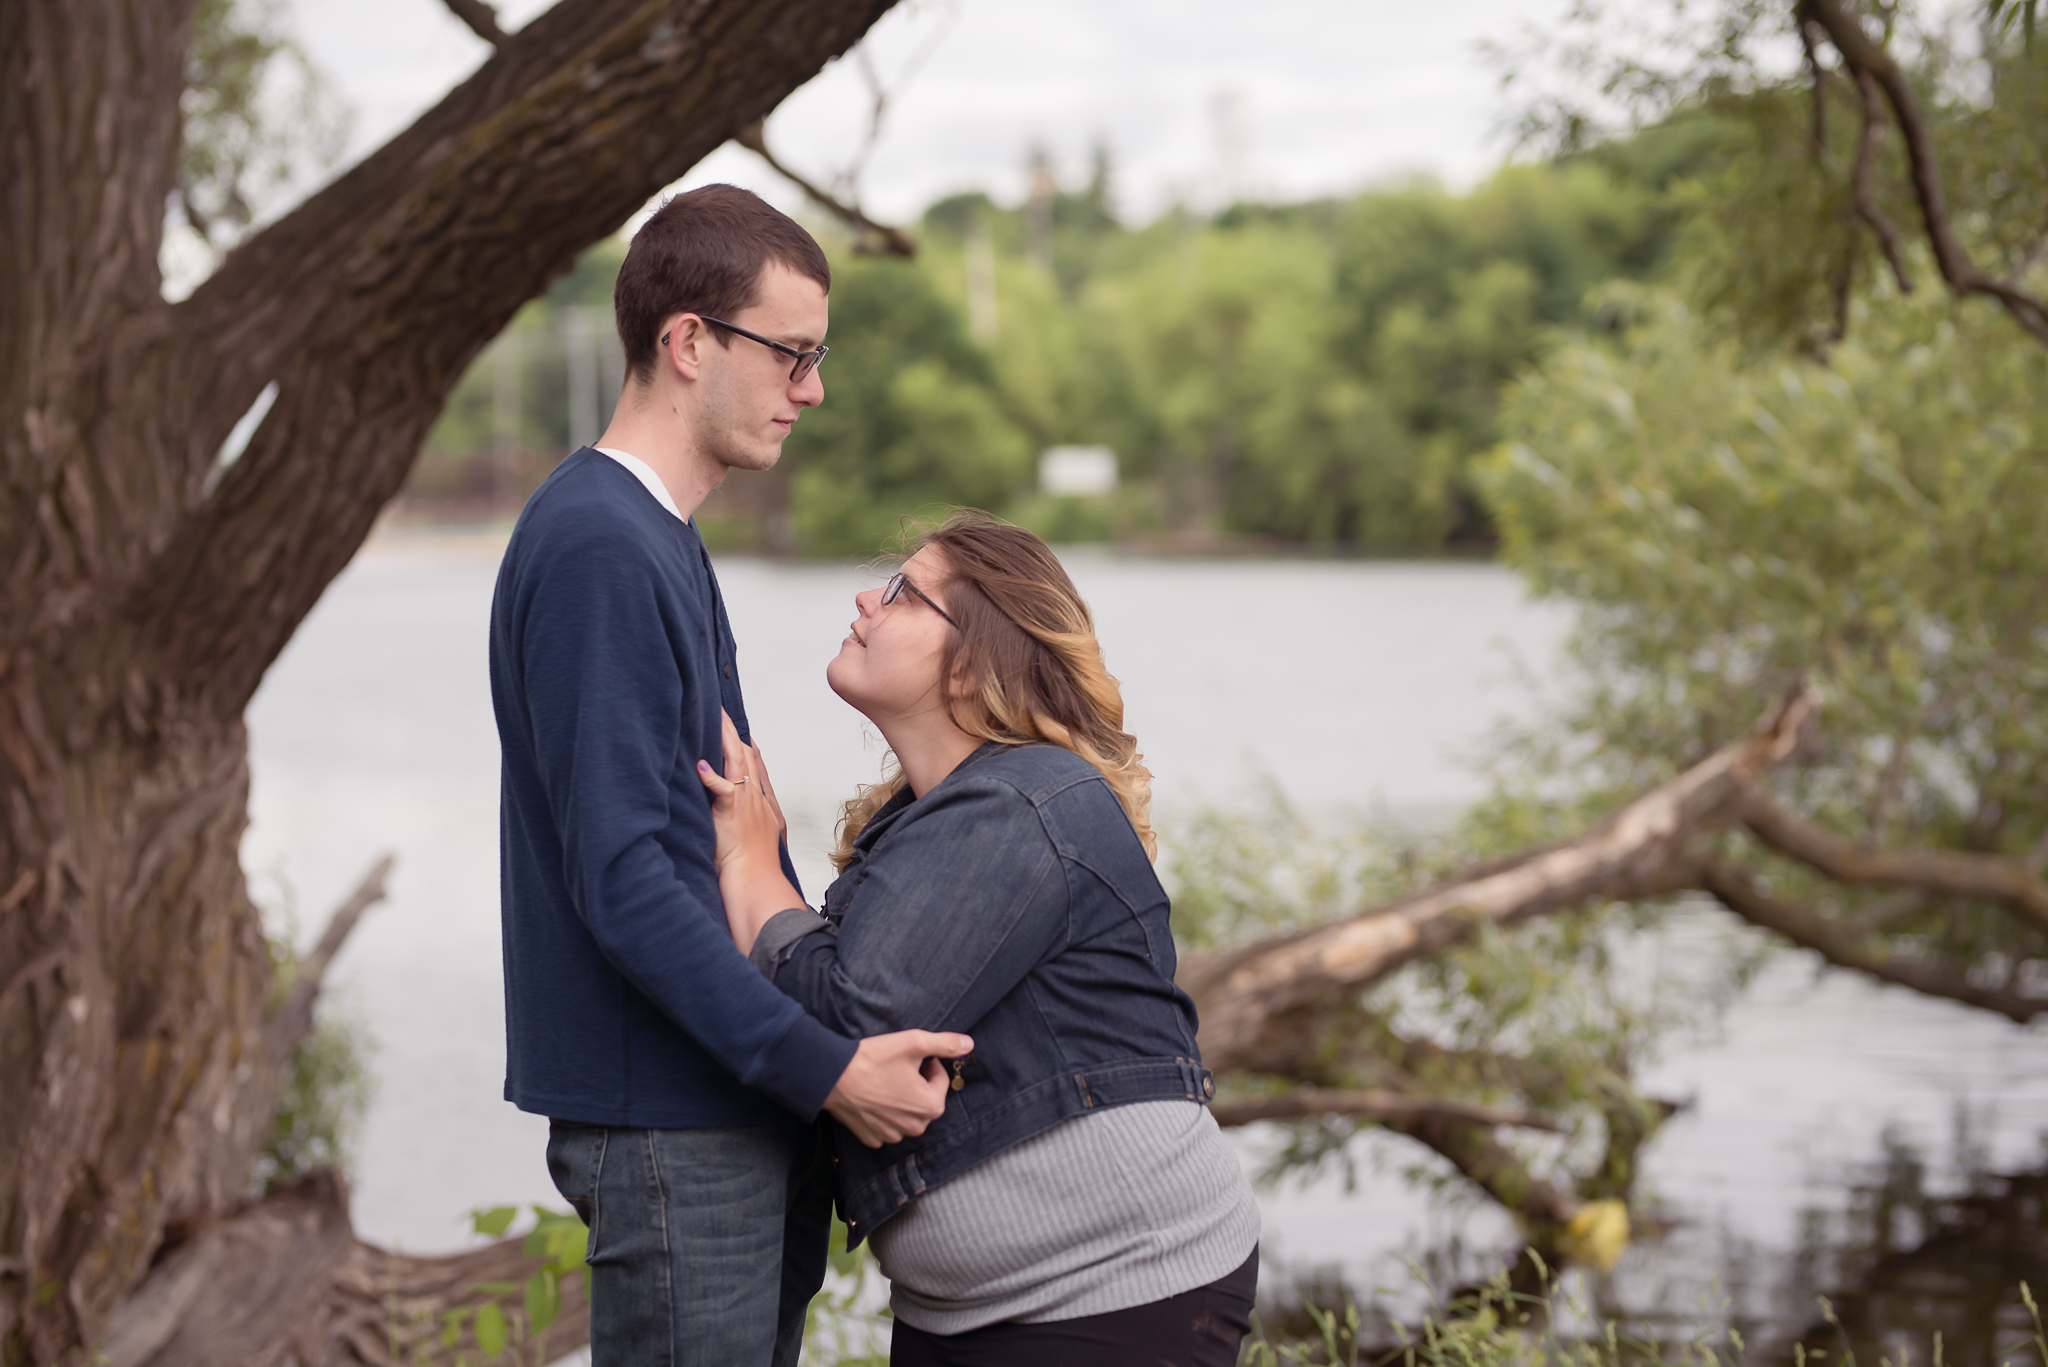 Couples503NaomiLuciennePhotography062018-Edit.jpg